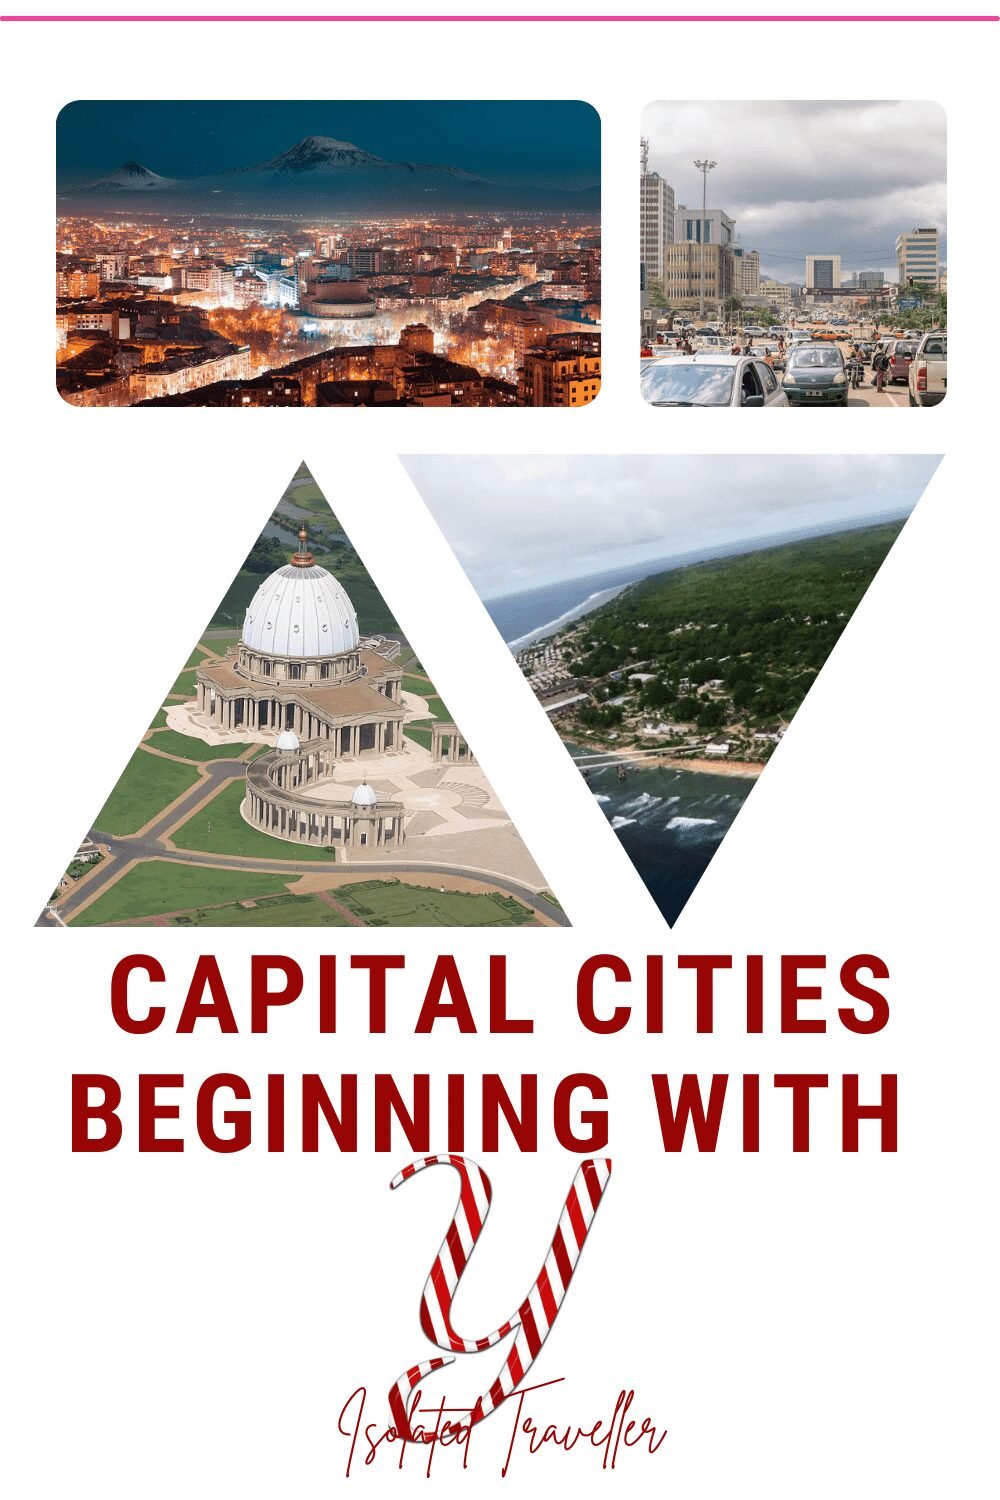 Capital Cities beginning with Y